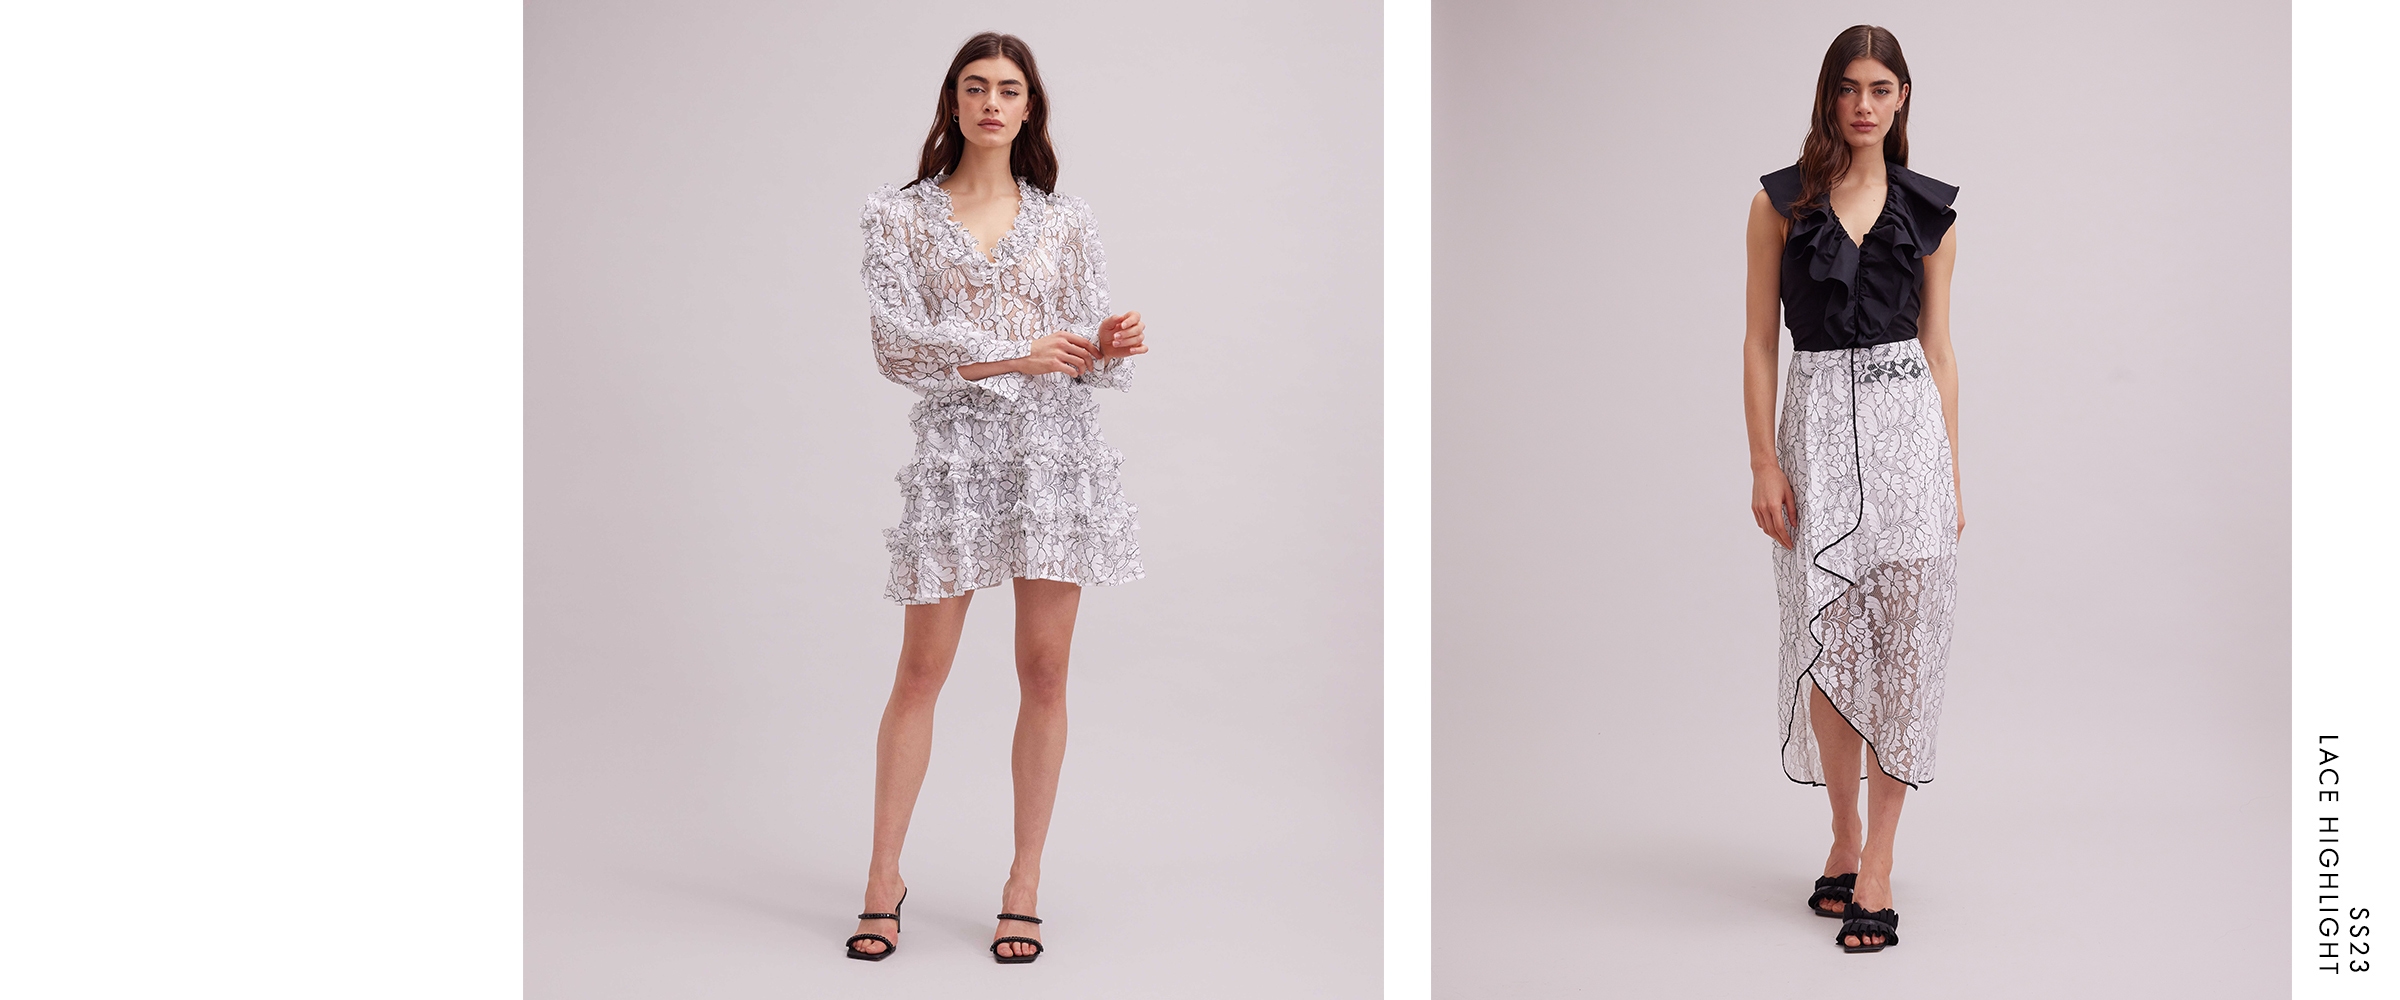 A new season calls for a new wardrobe, and there's nothing more luxurious than our selection of ultra-feminine silhouettes and romantic detailing. Explore the elevated textures and superior detailing of new lace staples.